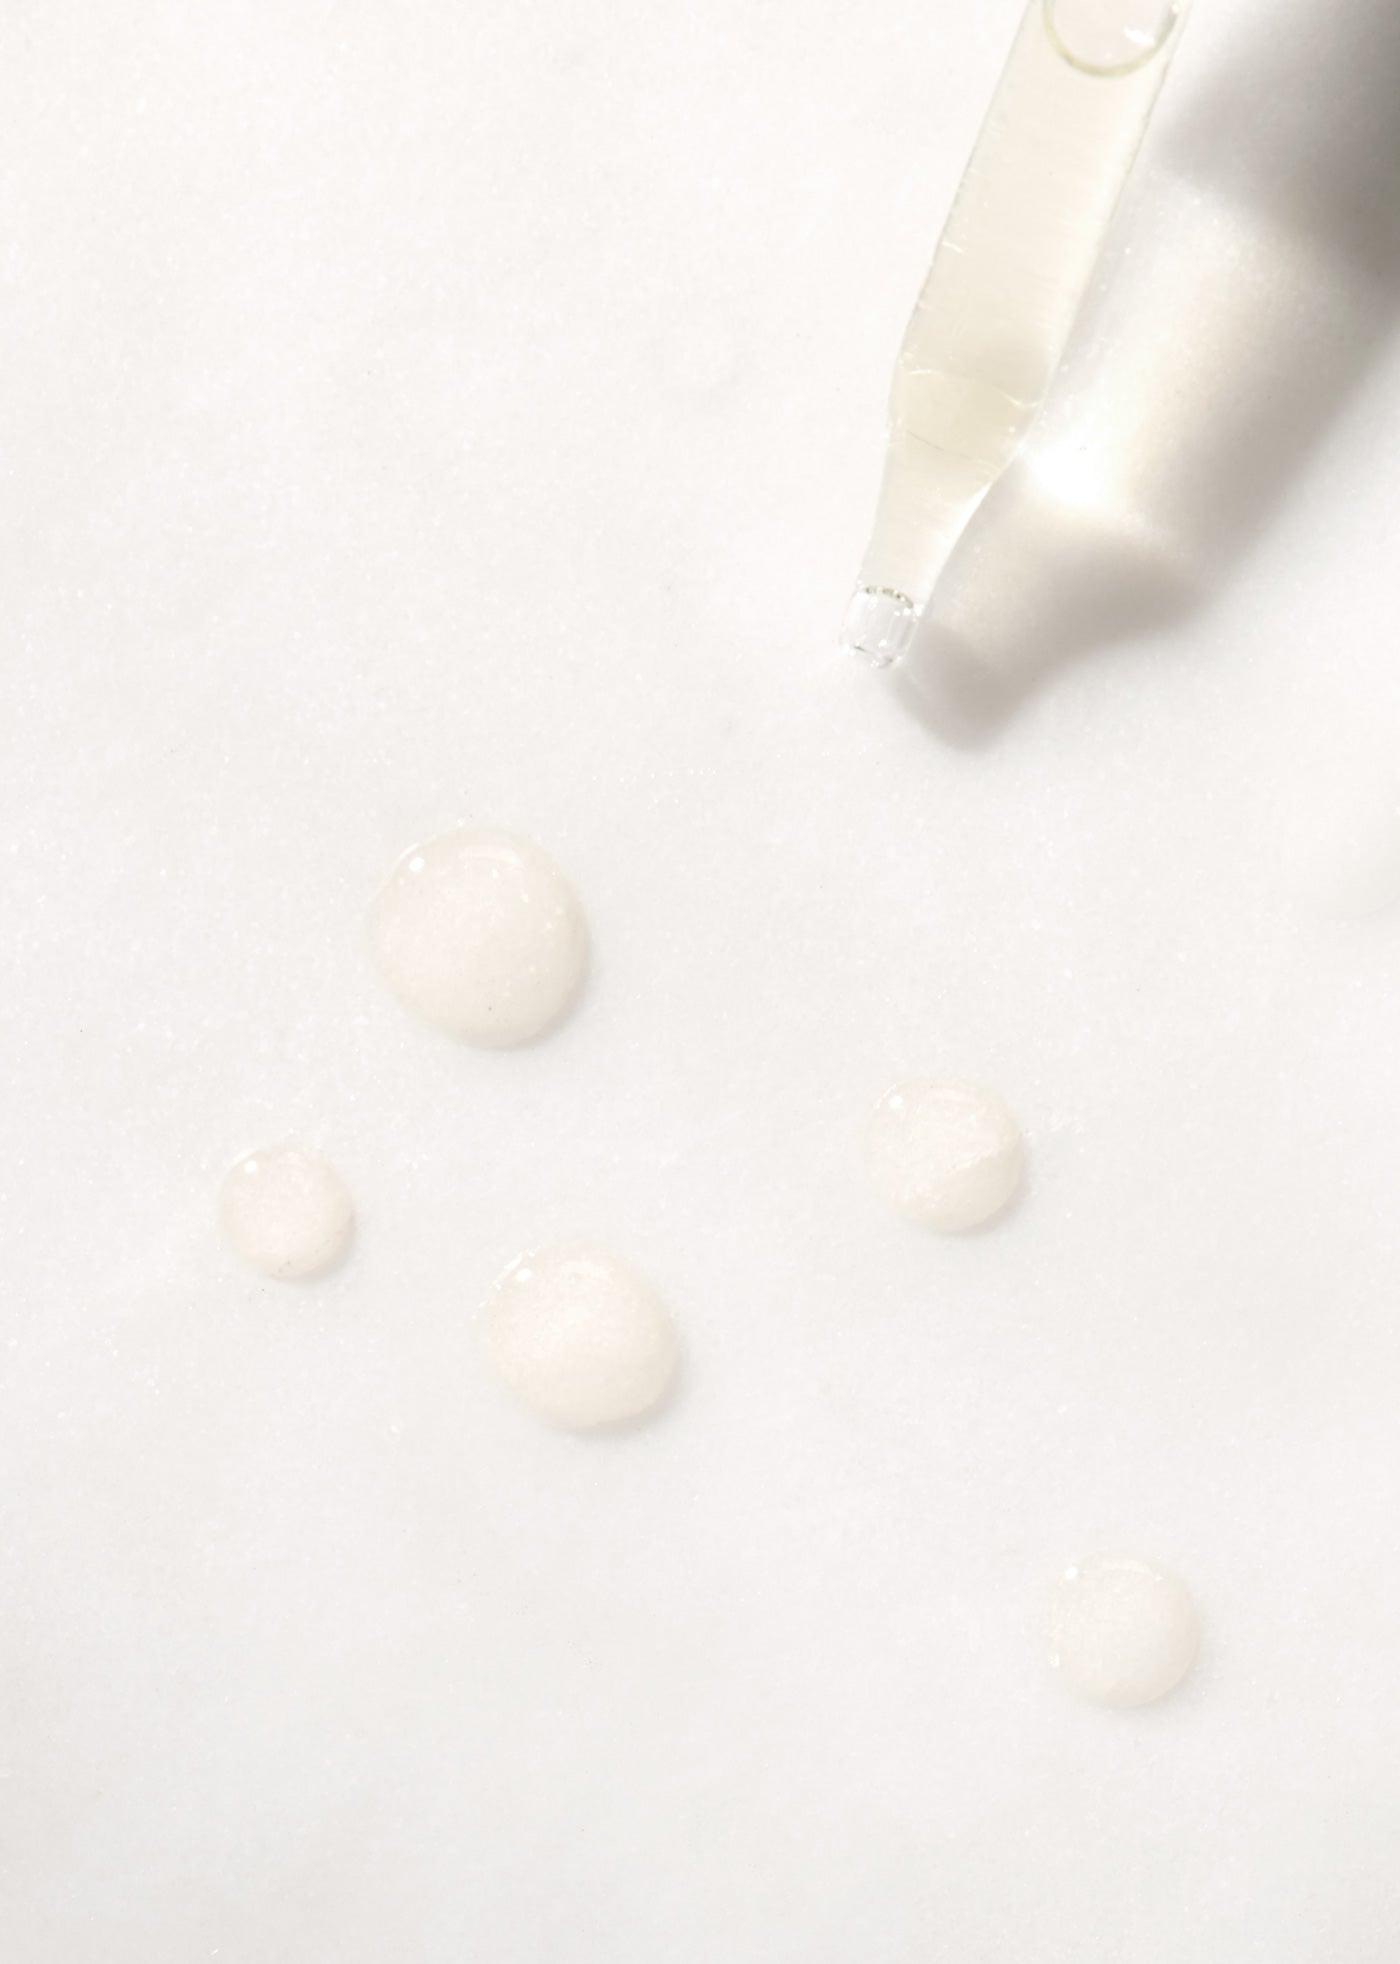 Tip of dropper with drops of translucent Retinol Treatment Oil on white background.